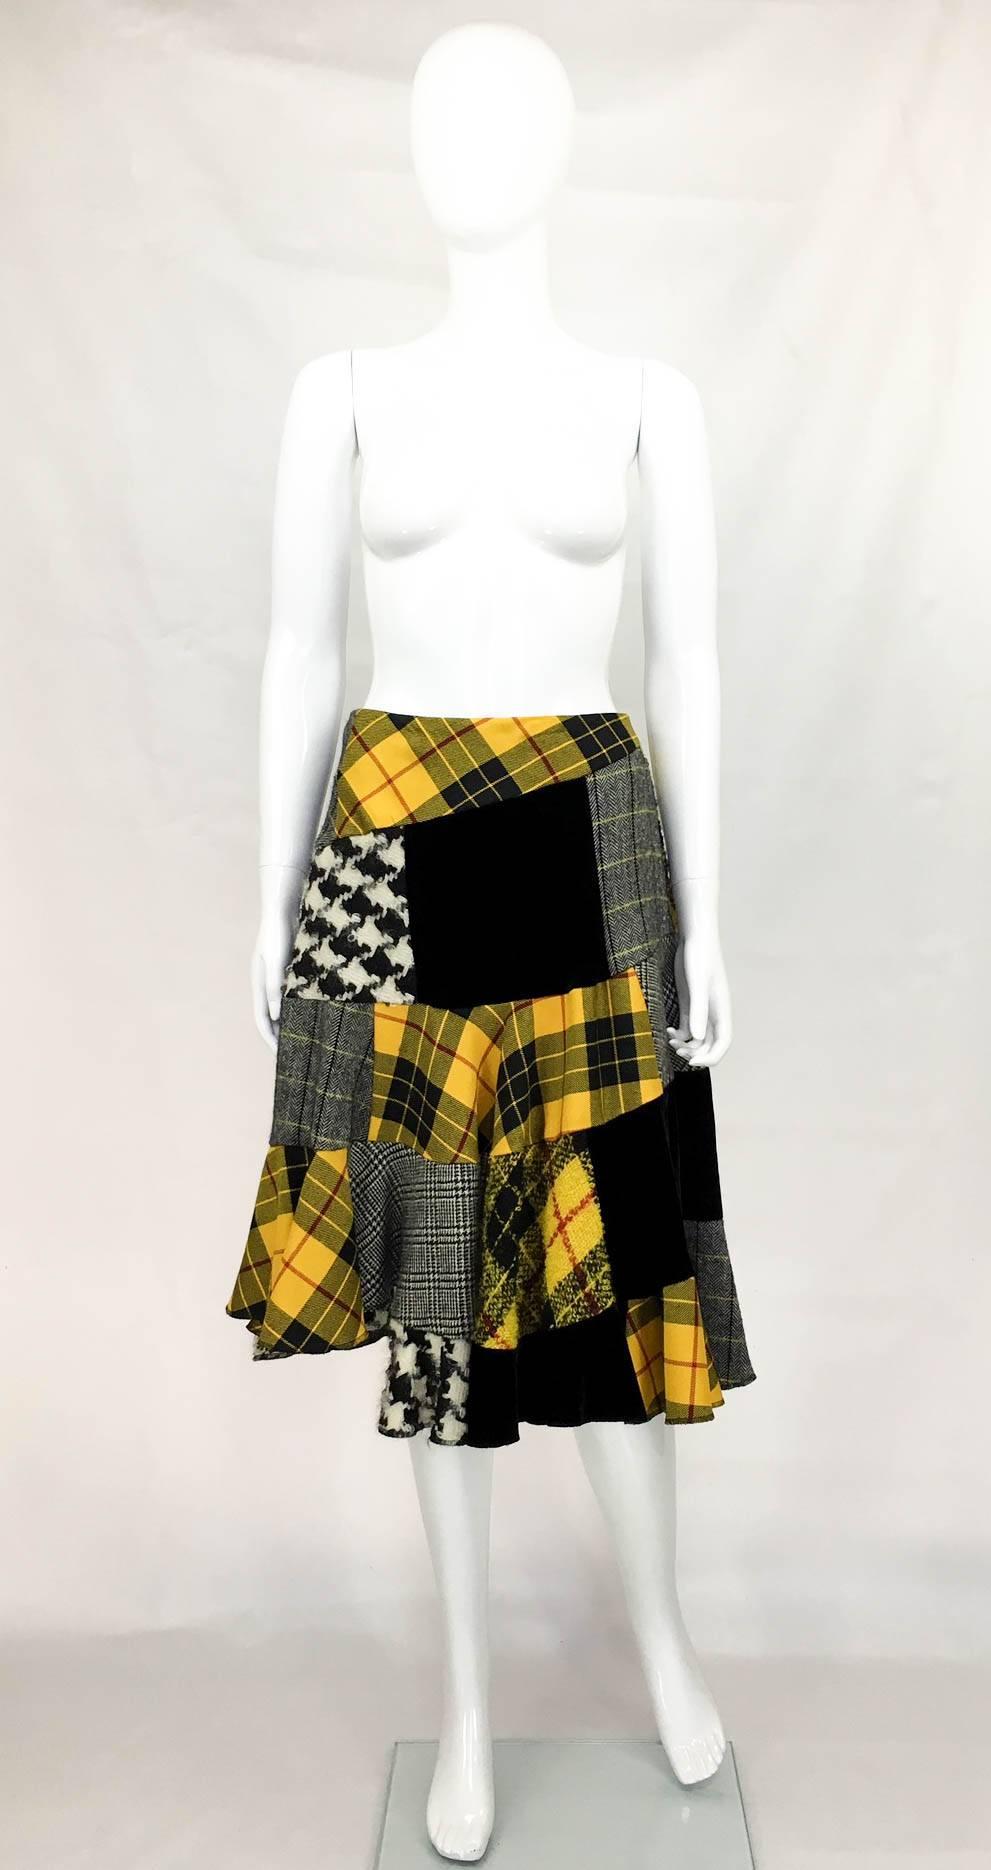 Comme des Garcons Patchwork Asymmetric Skirt - Early 1990s at 1stDibs